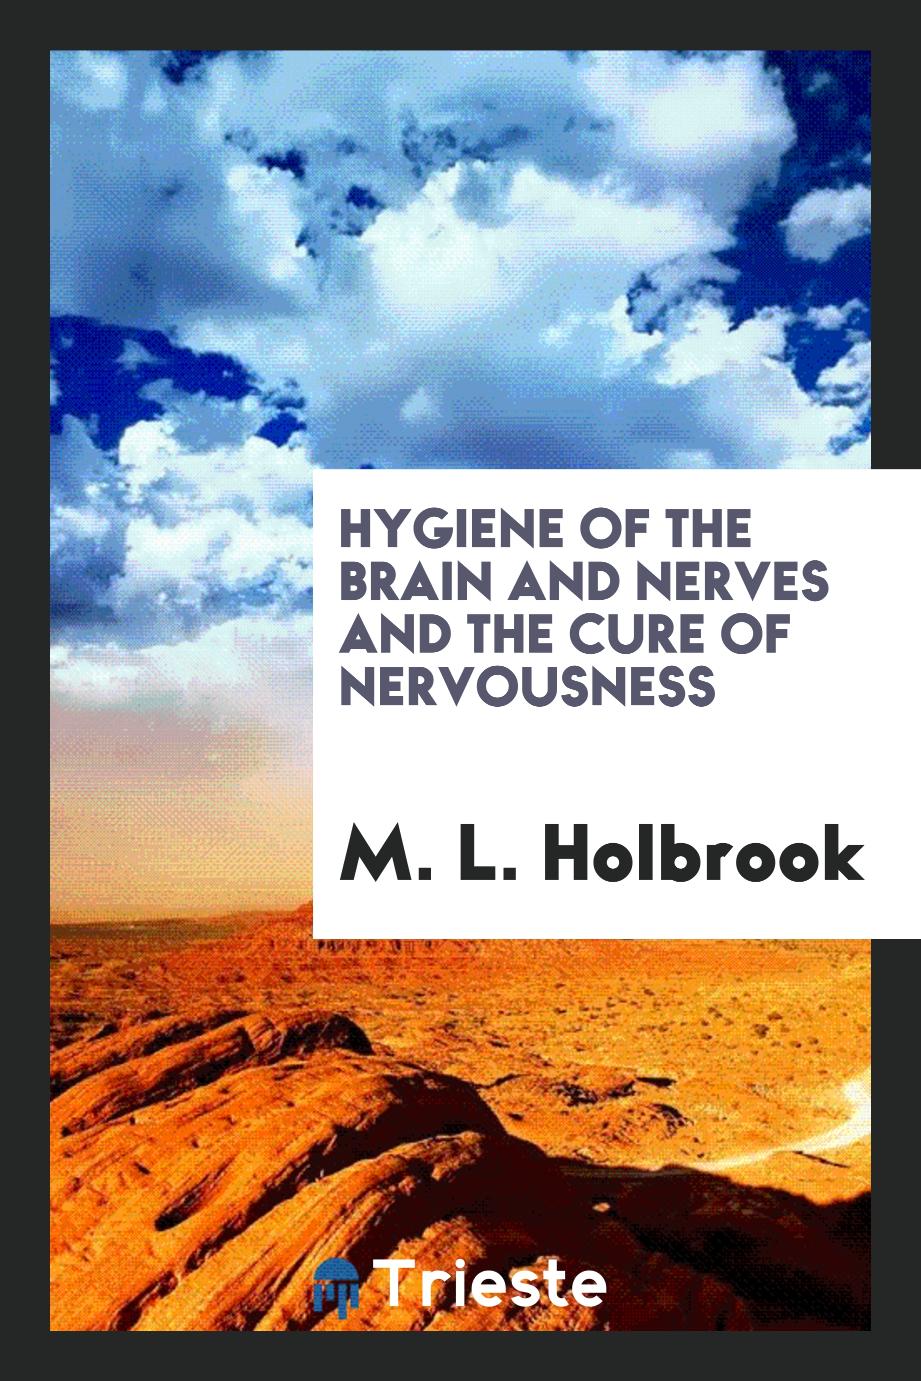 Hygiene of the brain and nerves and the cure of nervousness